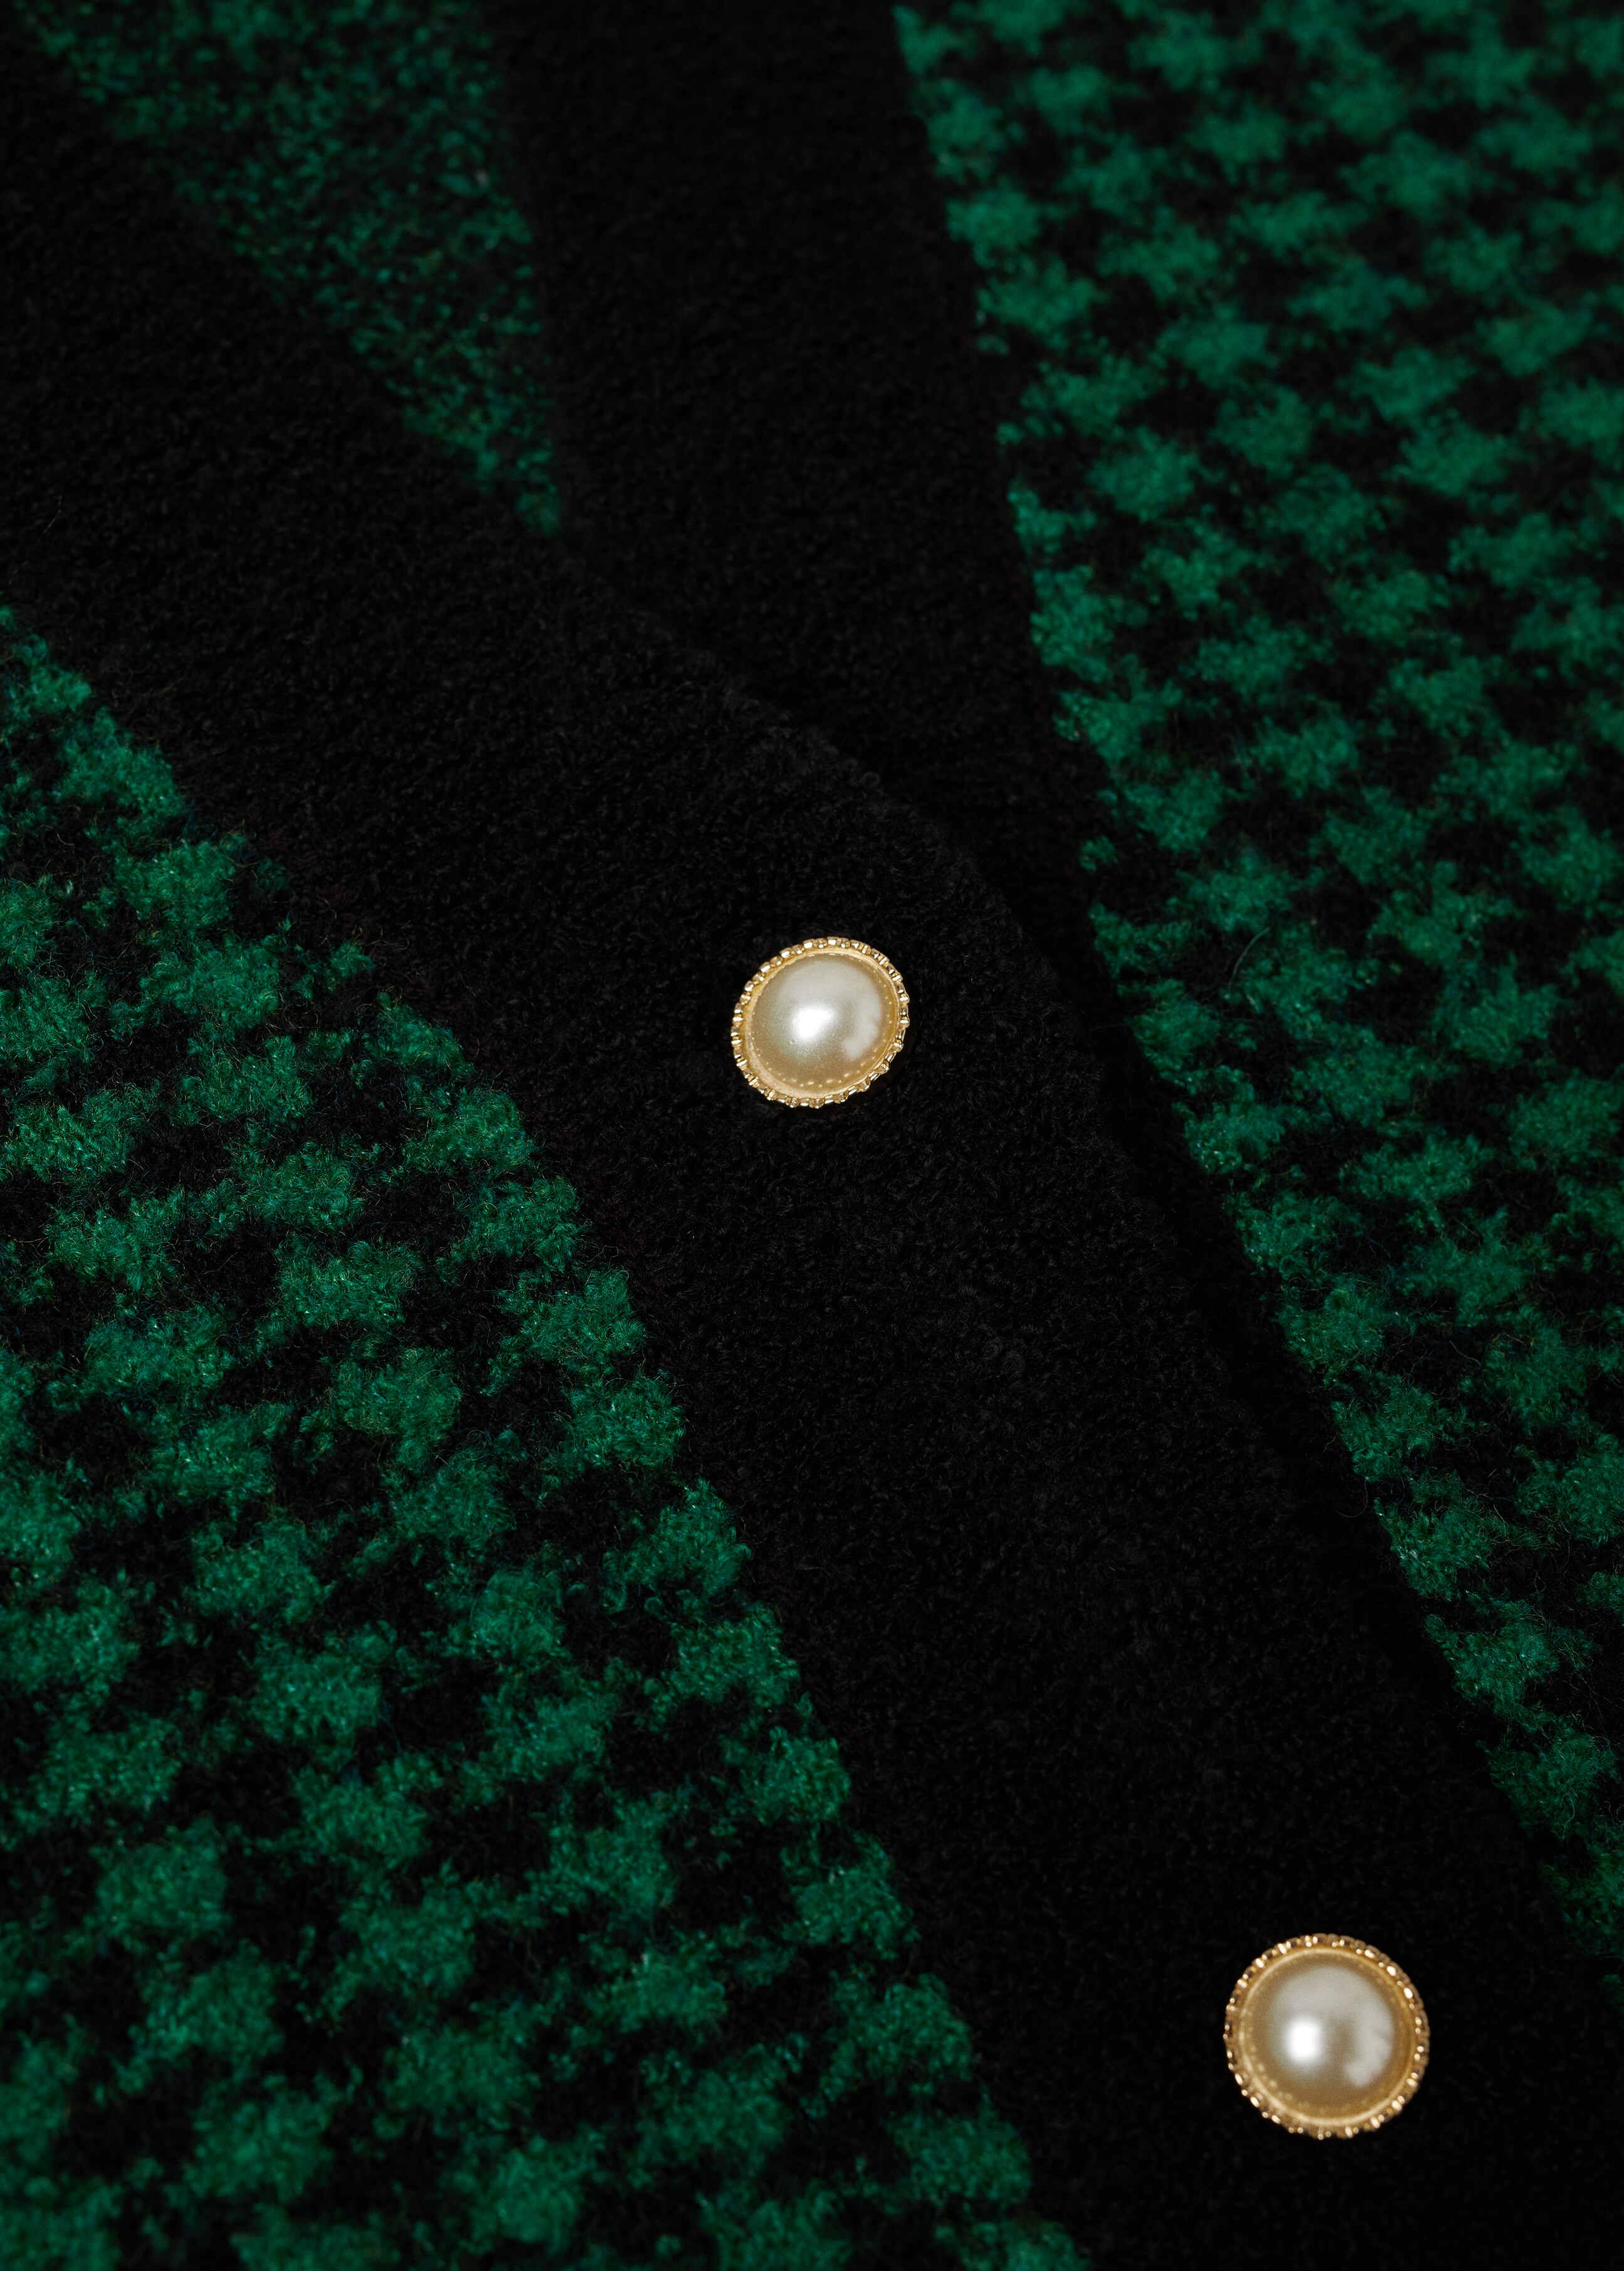 Houndstooth vest - Details of the article 8